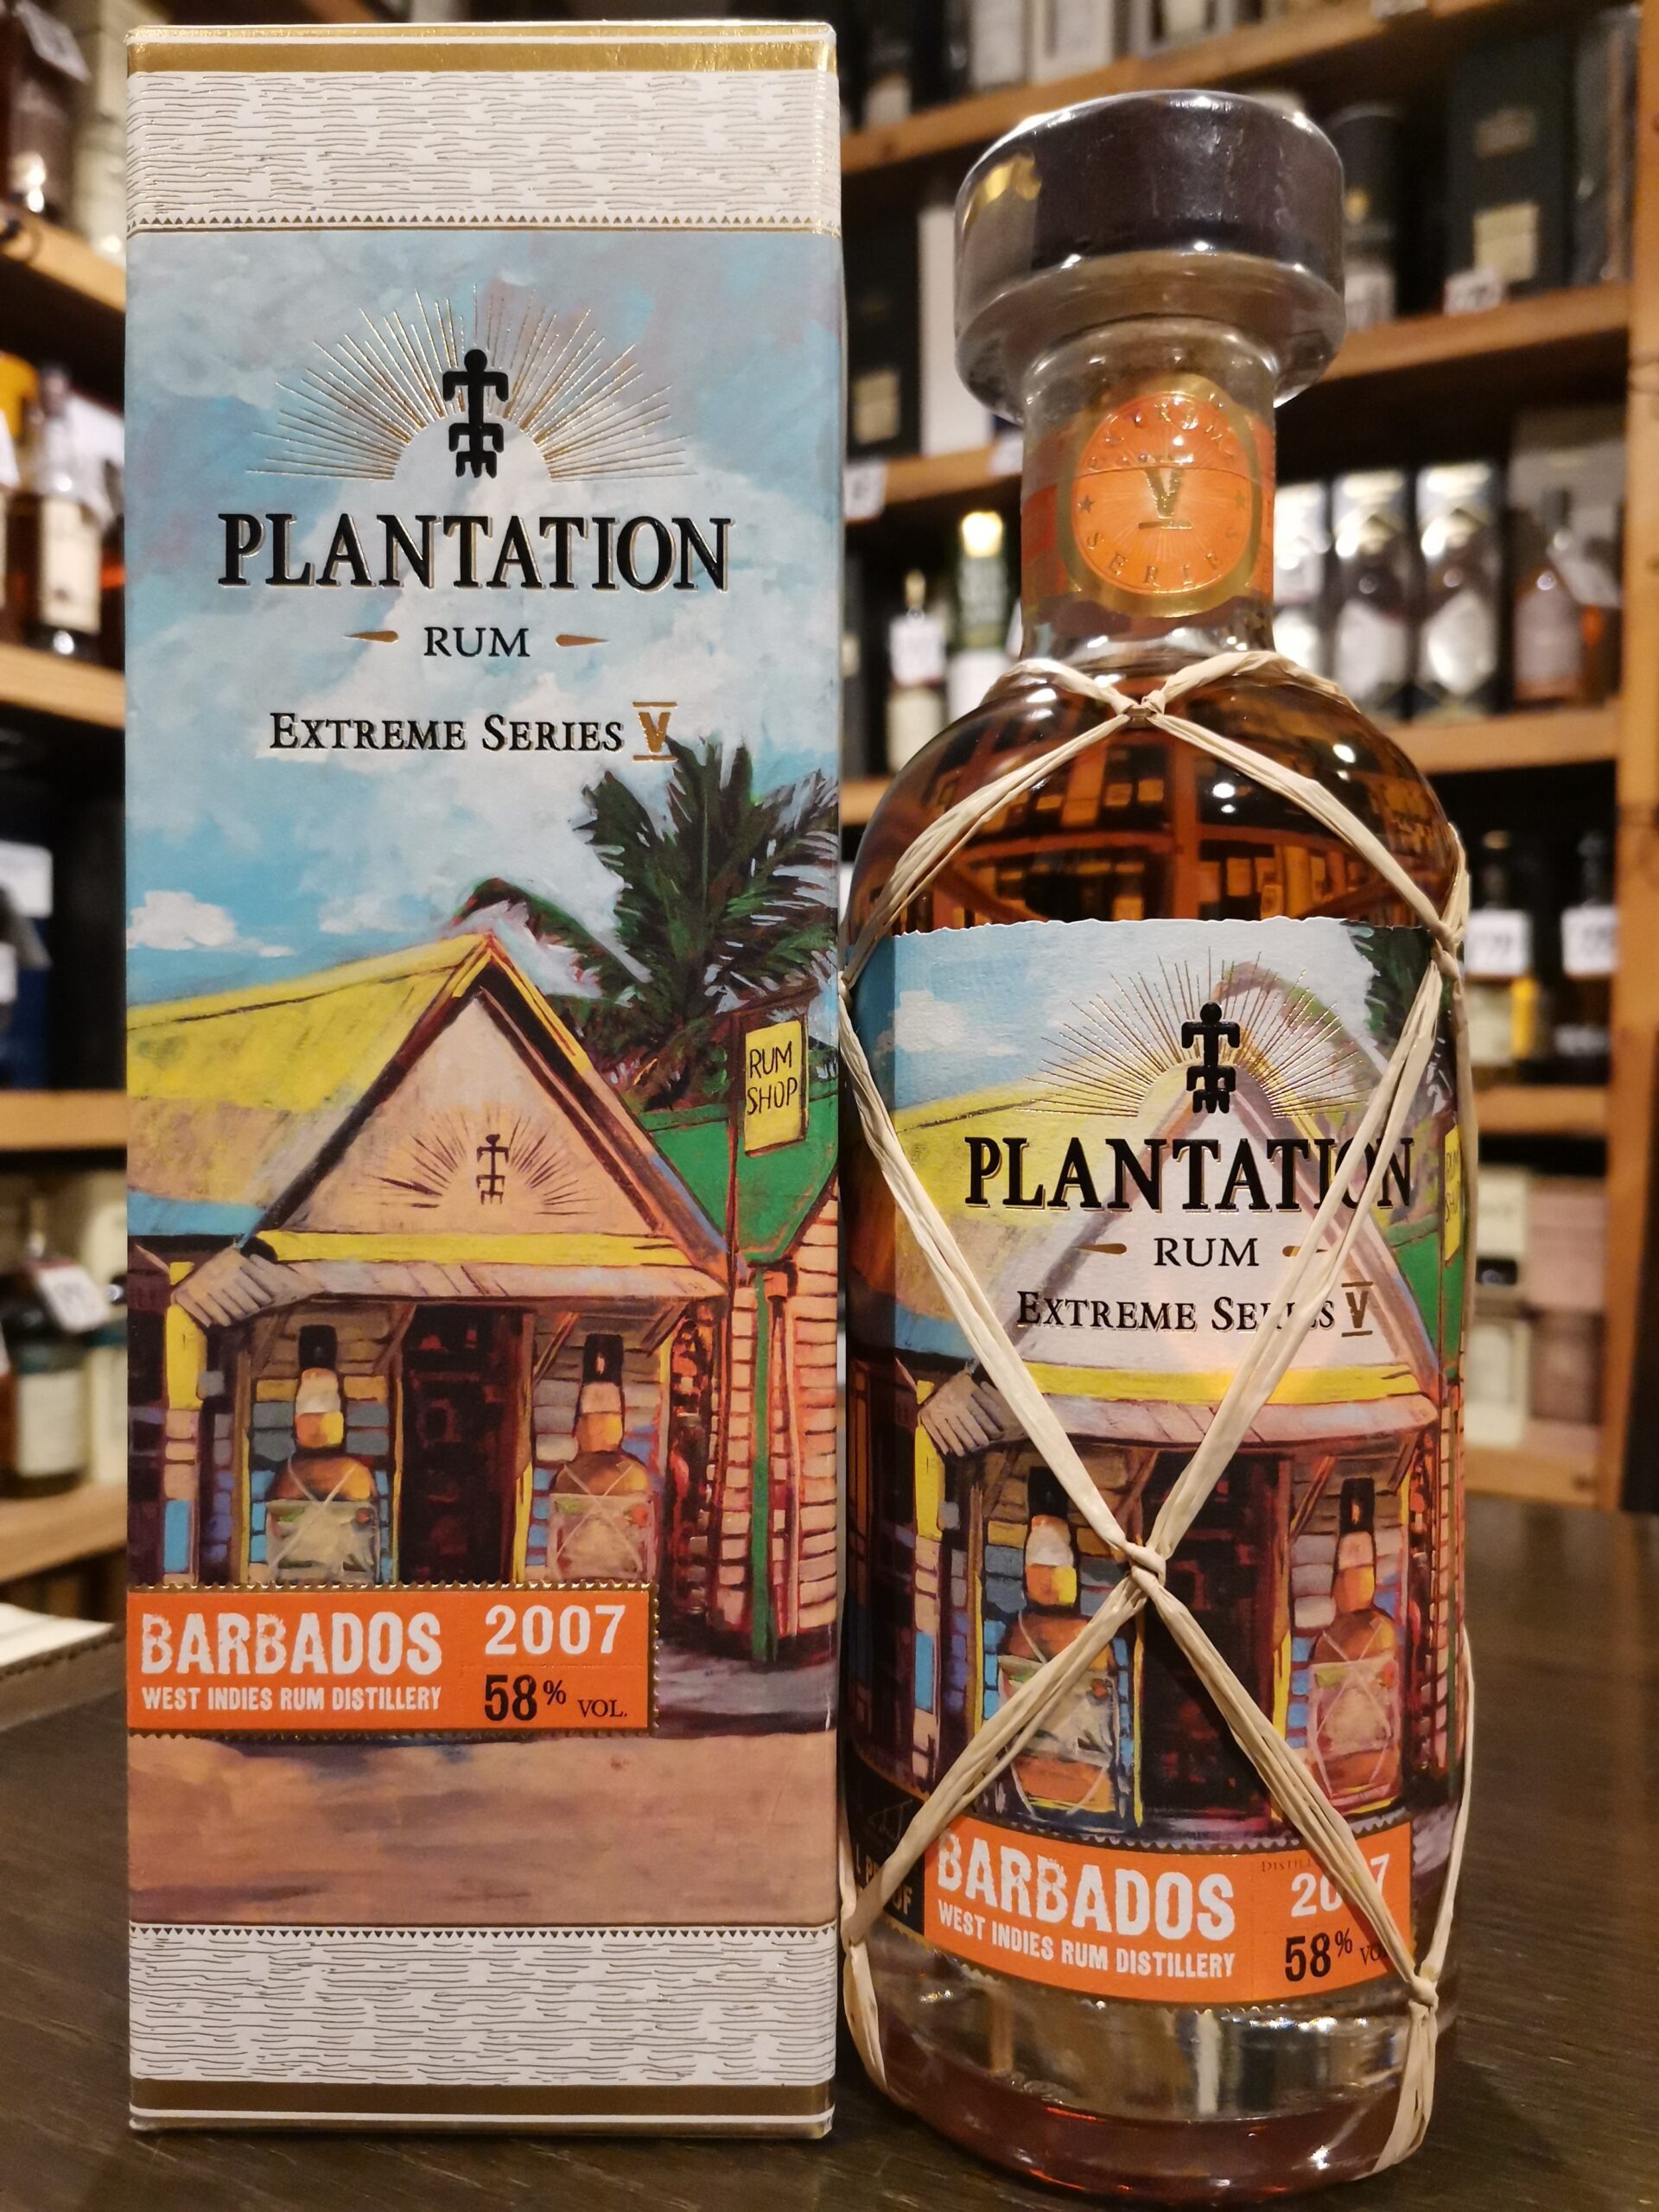 Plantation Rum-Extreme Series V Barbados 2007 - Old Town Tequila